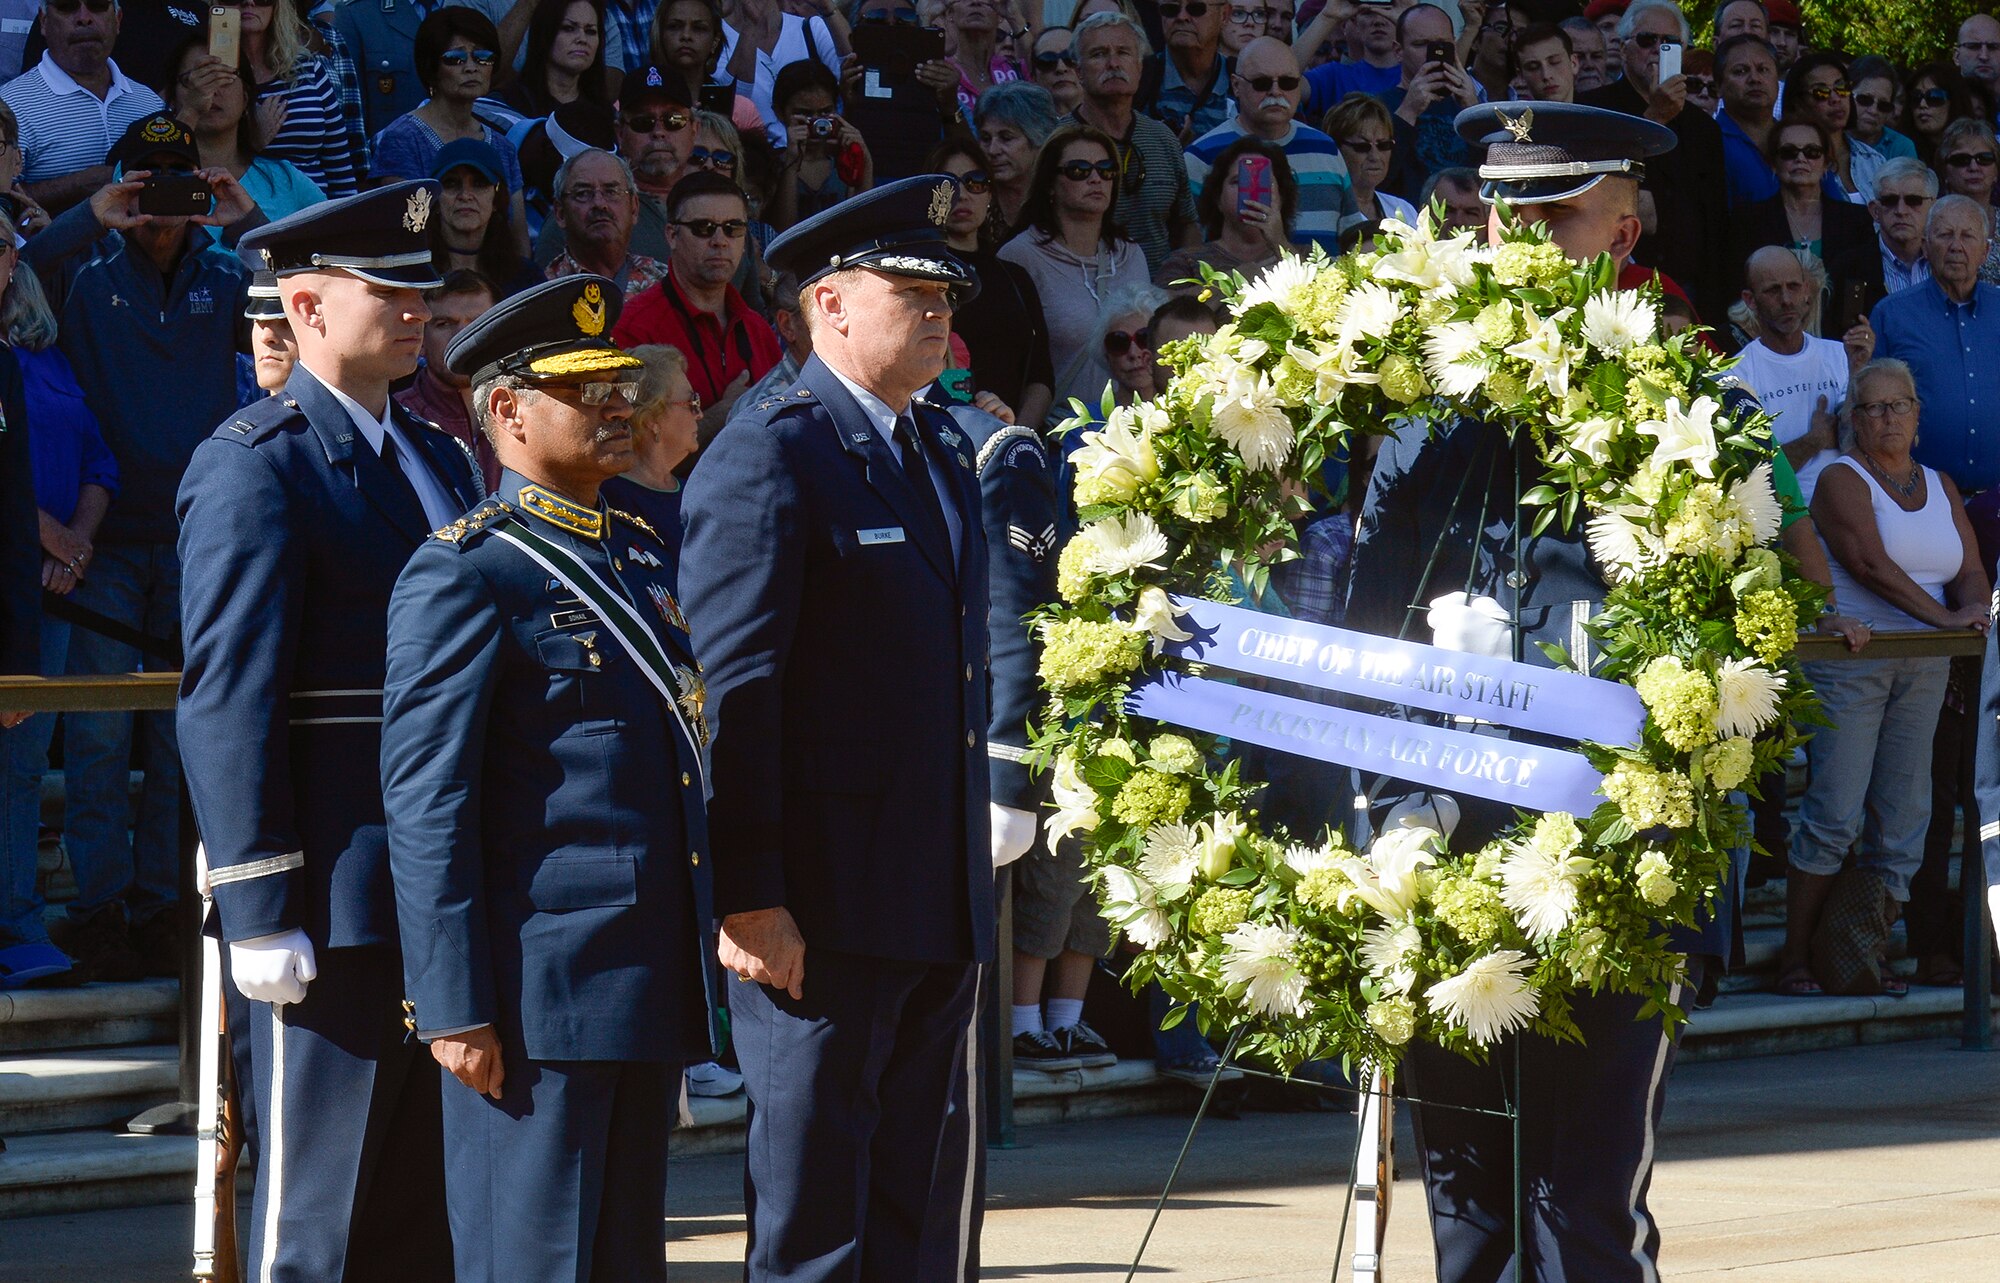 Air Chief Marshal Sohail Aman, Chief of Air Staff of the Pakistan Air Force, and Air Force District of Washington Commander Maj. Gen. Darryl Burke participate in a wreath laying ceremony at the Tomb of the Unknown Soldier at Arlington National Cemetery on Oct. 6, 2015. Distinguished visitors commonly pay formal respects to the sacrifice of America's veterans in foreign wars by placing a wreath before the Tomb. The Air Force District of Washington brings air, space and cyberspace capabilities to the joint team protecting the nation's capital, and supports local personnel and those serving worldwide. (Photo/ Andy Morataya)